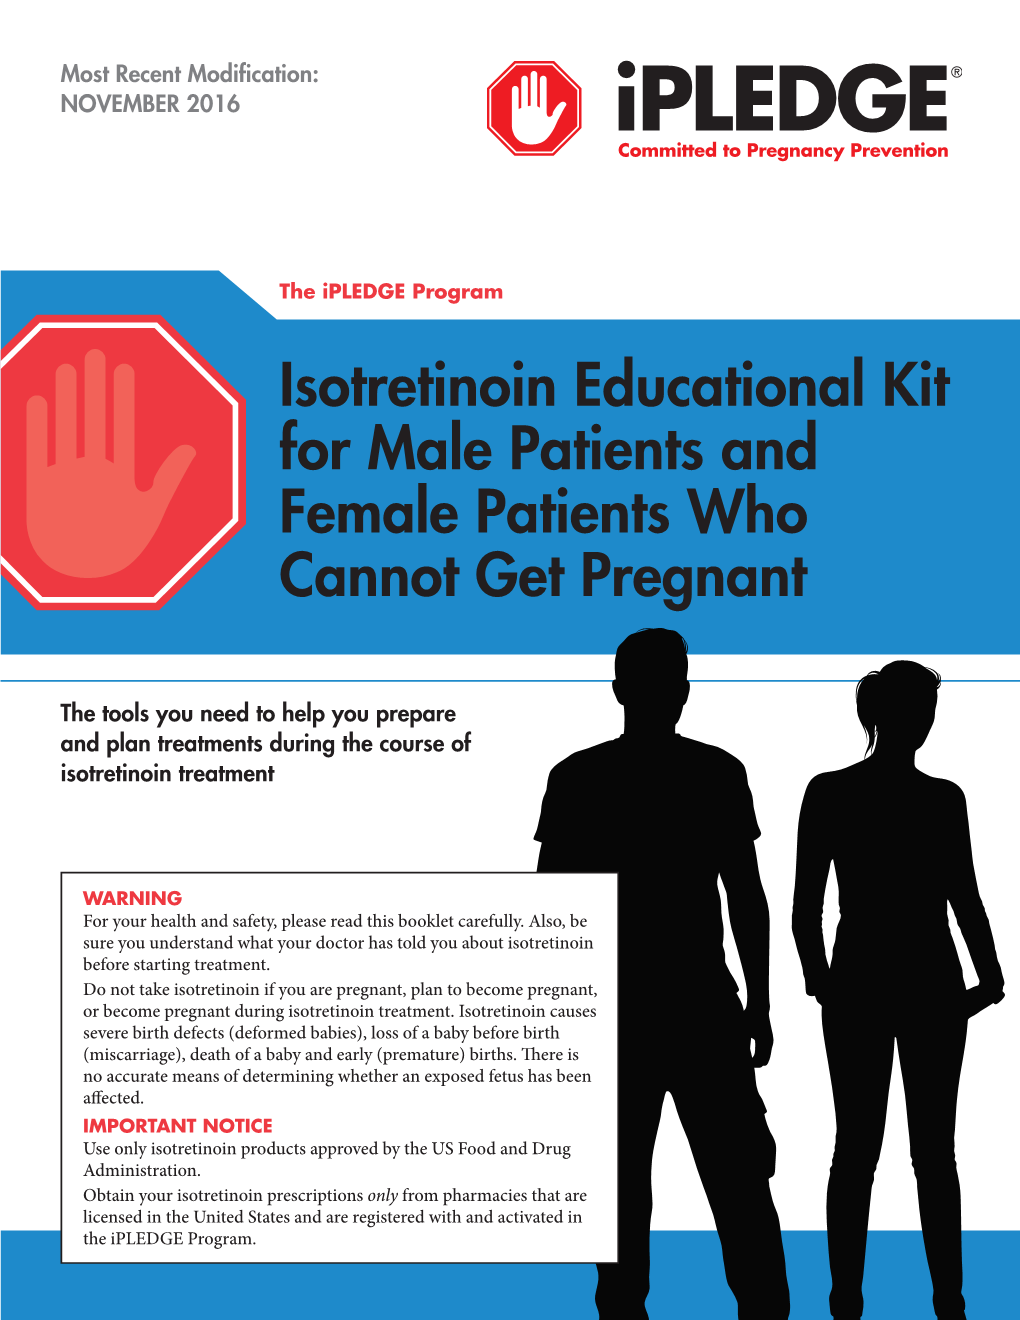 Isotretinoin Educational Kit for Male Patients and Female Patients Who Cannot Get Pregnant